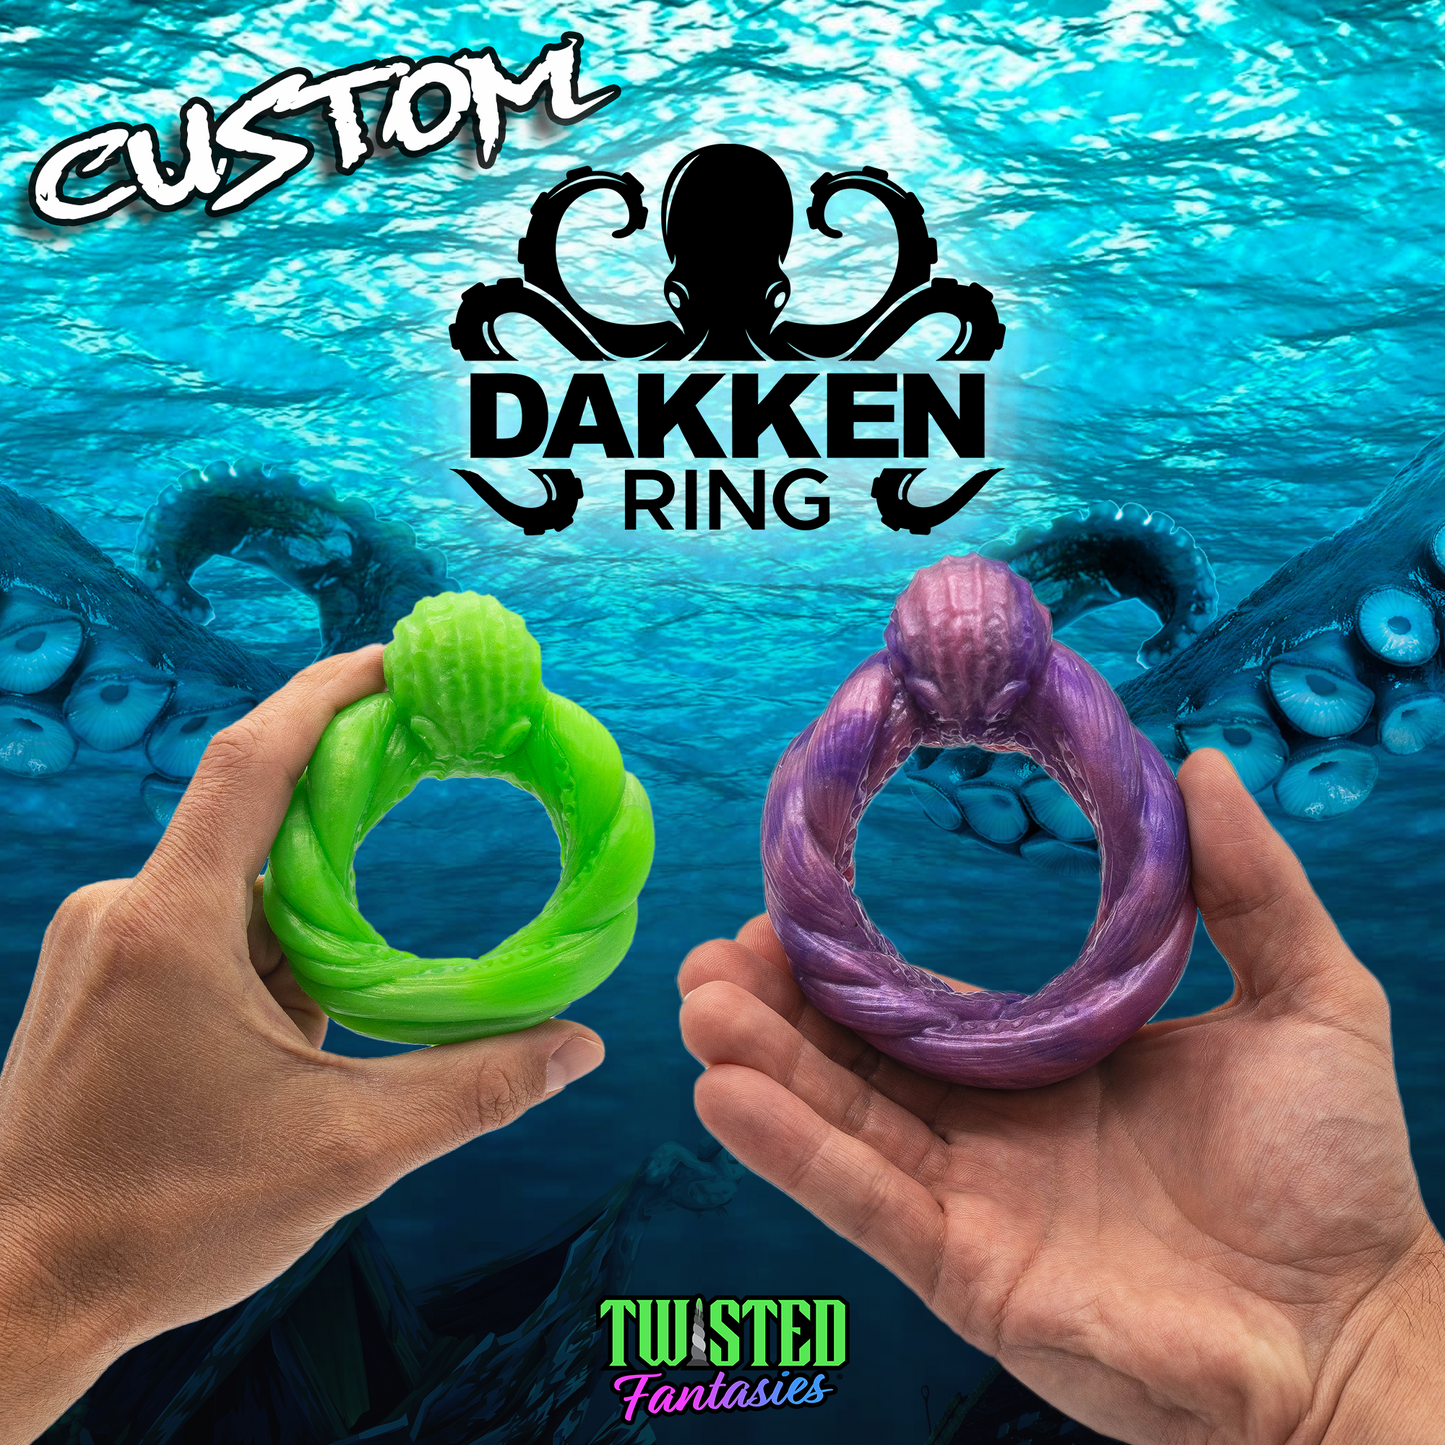 The custom tentacle cock ring. Customize your own tentacle cock ring, choose size, colors, and firmness. Our cock rings are made of platinum-grade silicone.